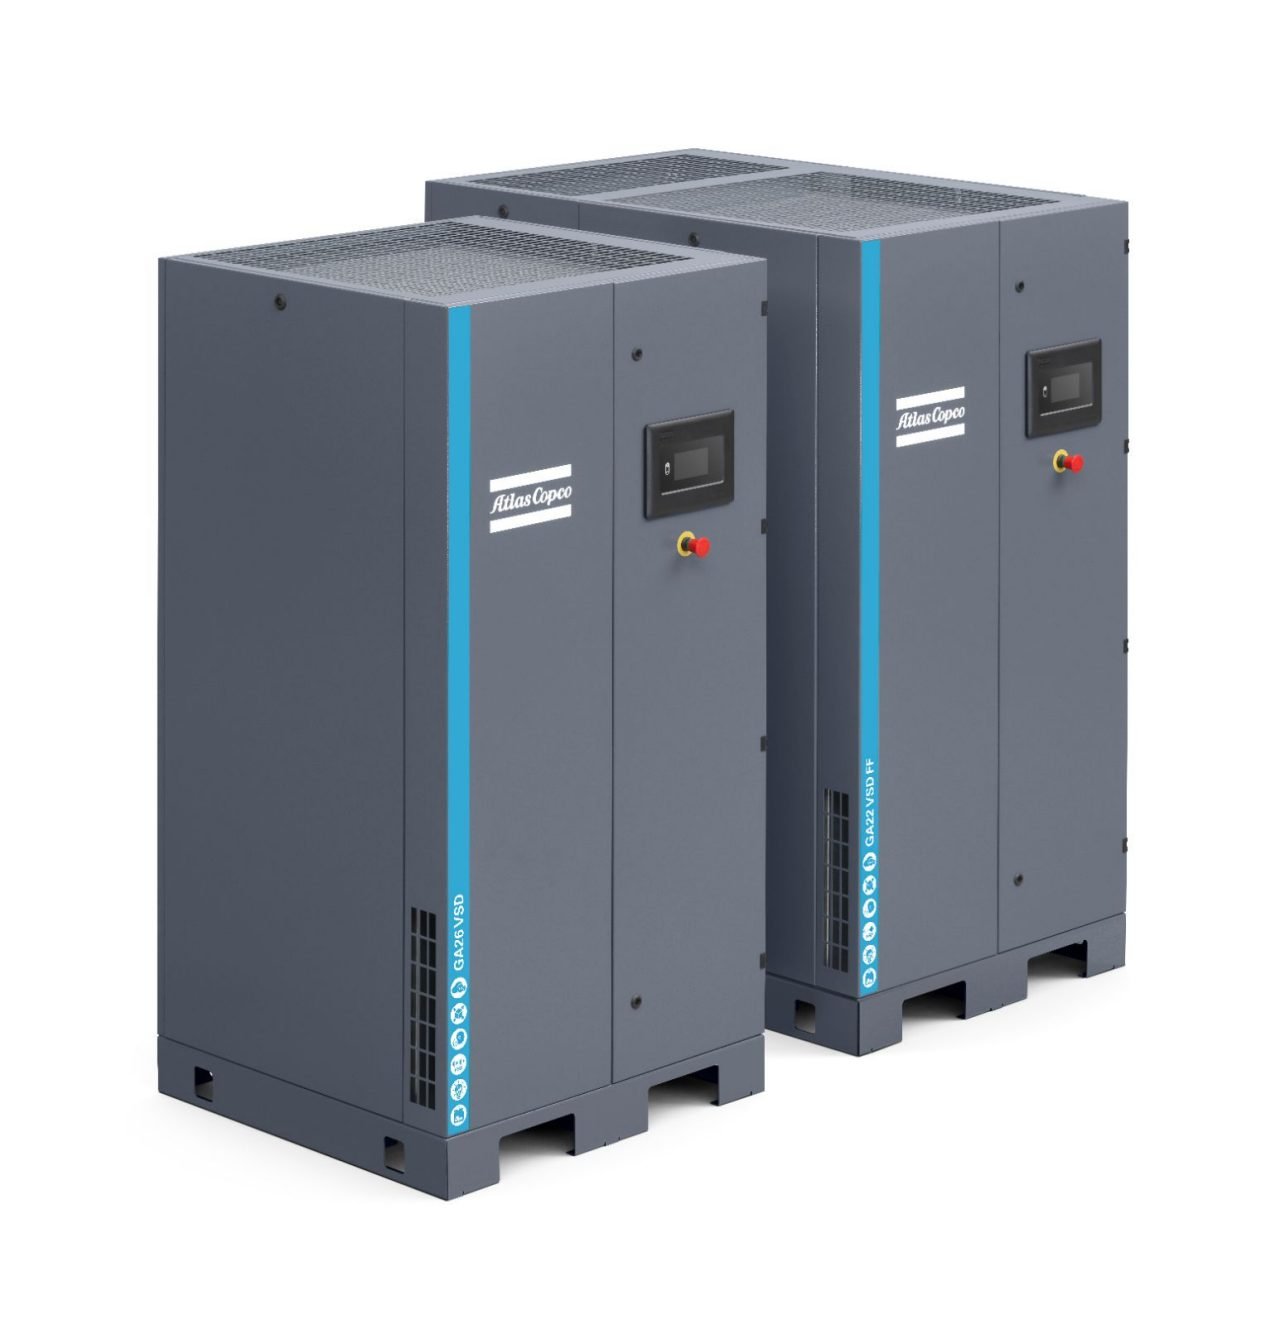 GA 22-37 VSD Oil-injected screw compressors with Variable Speed Drive technology